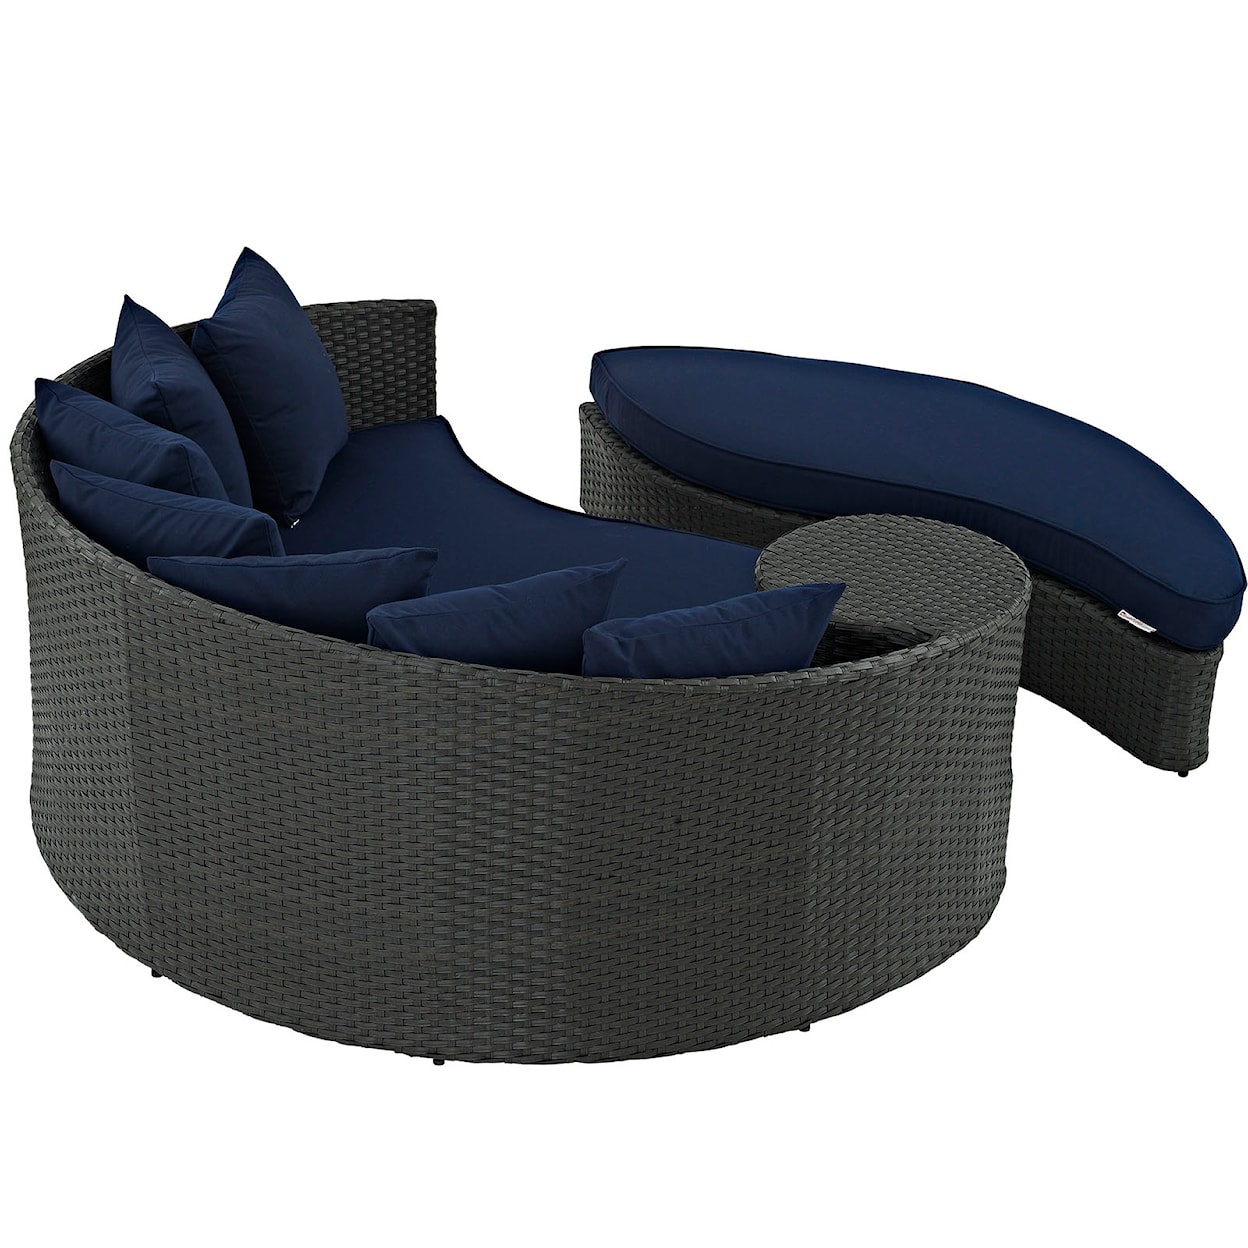 Modway Sojourn Outdoor Daybed